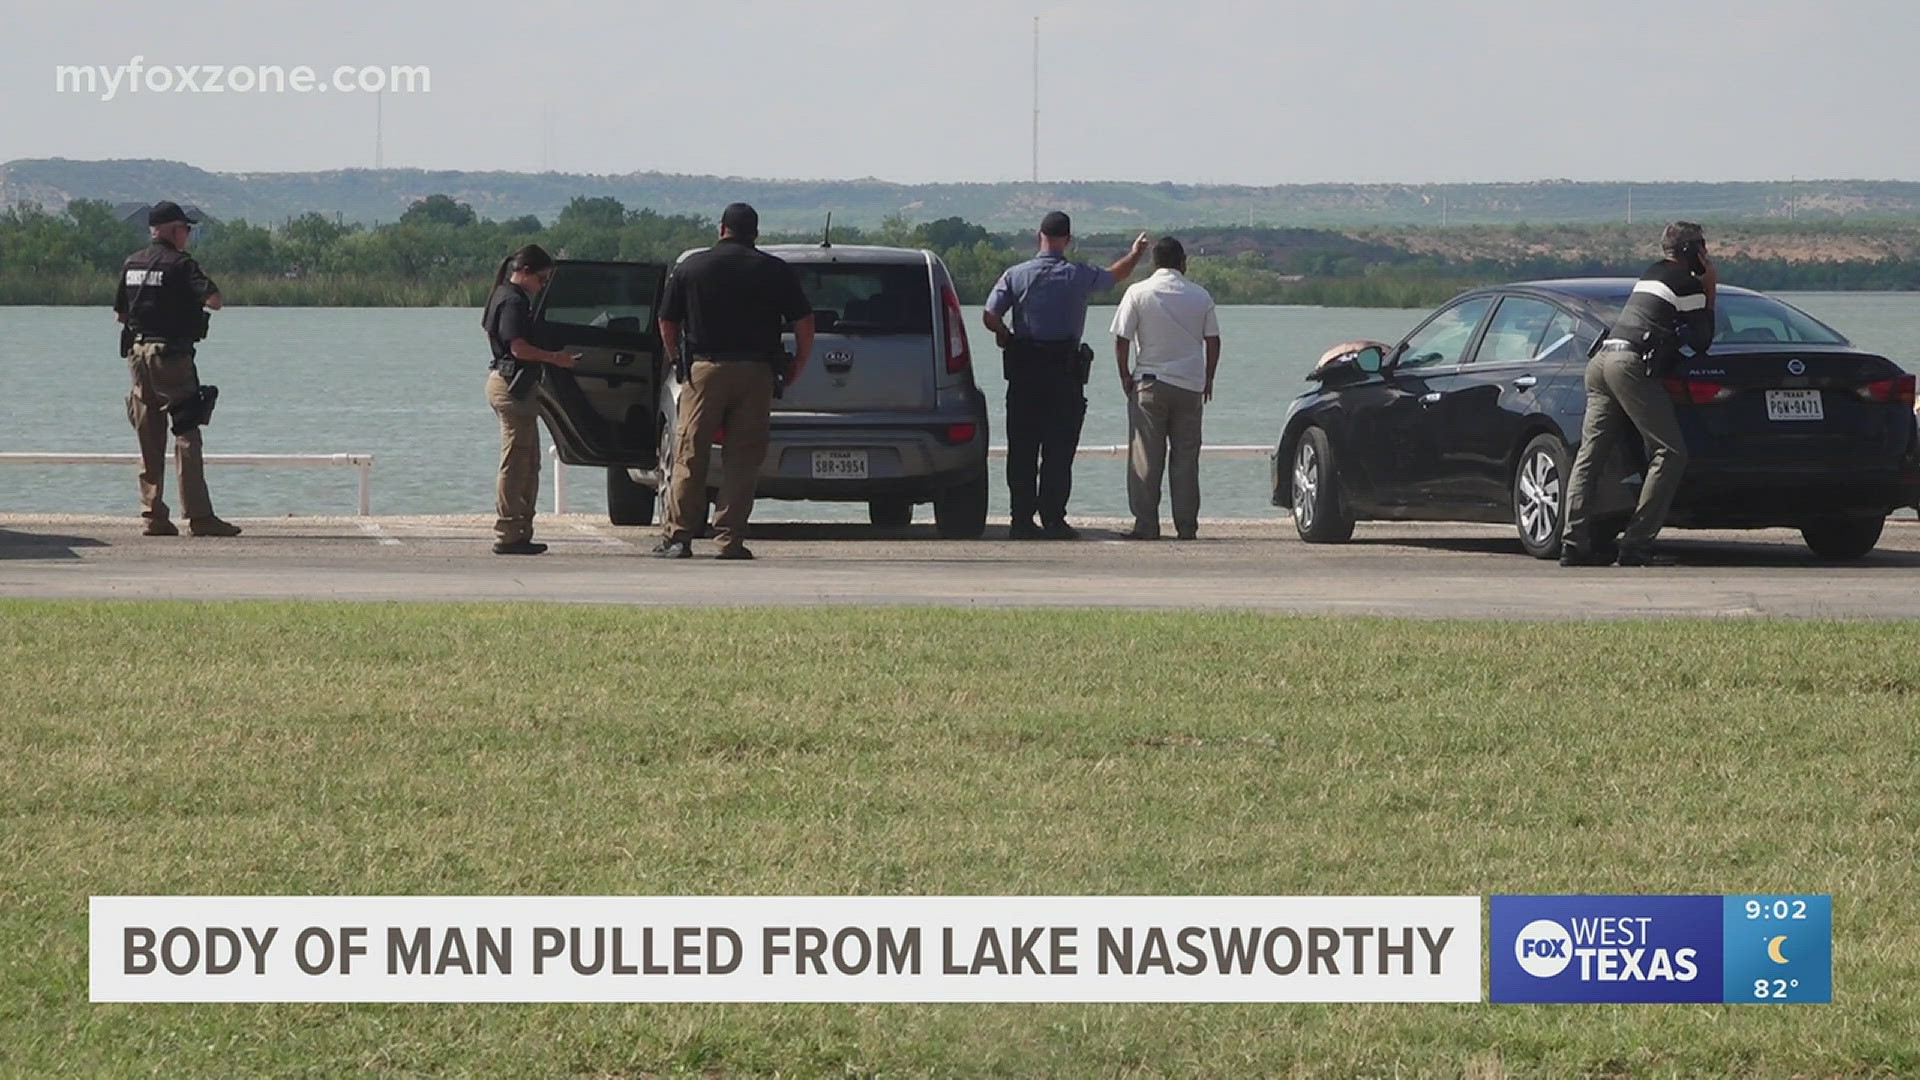 San Angelo Police officers were called to the lake for a report of a possible dead body in the water. They found a 39-year-old man's body in the lake.